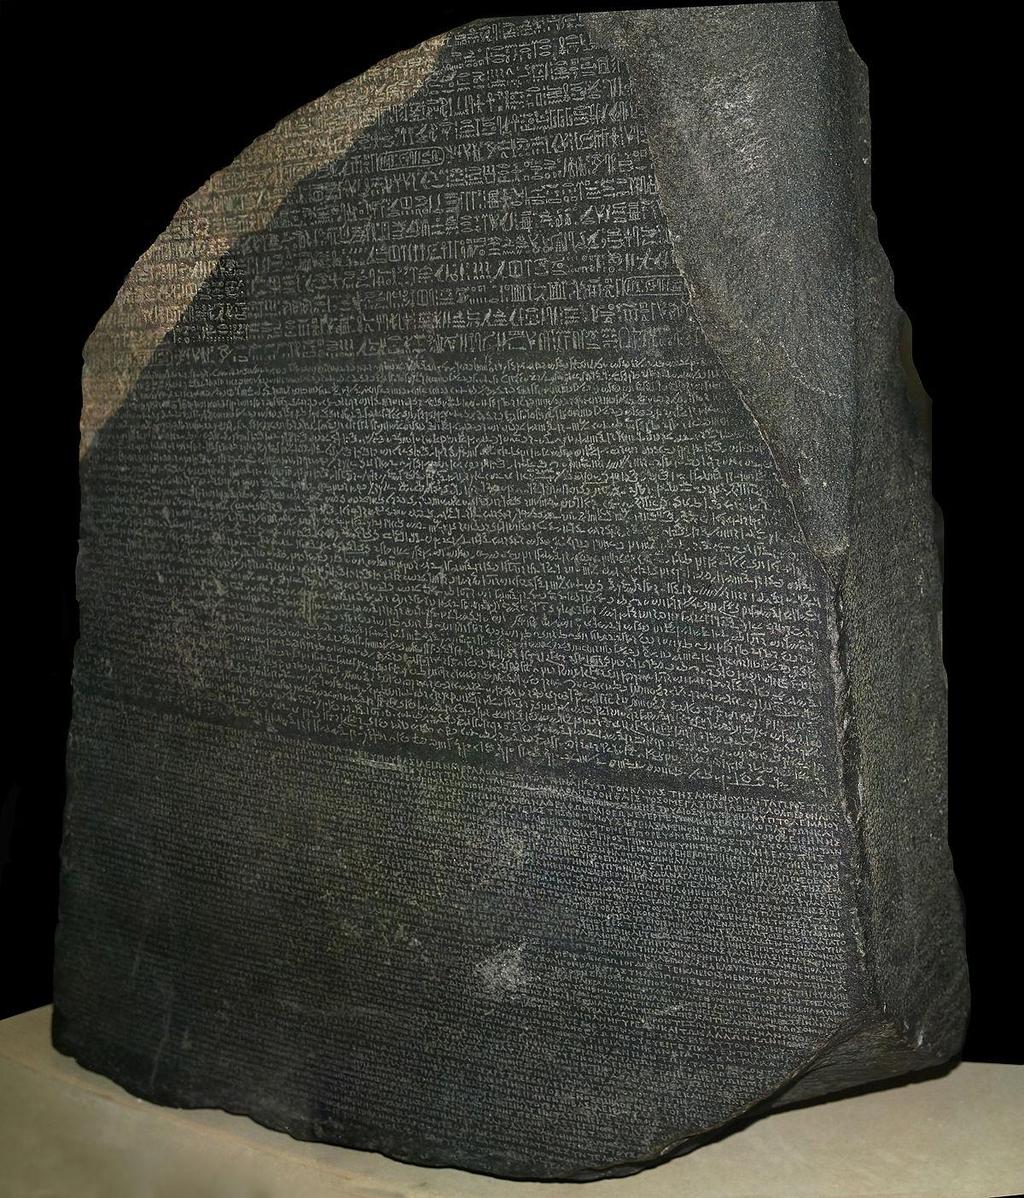 How did we figure out how to read Hieroglyphics??? https://www.youtube.com/watch?v=yeq-6eymq_o (3 Minute Rosetta Stone Video) The Rosetta Stone was found in 1799!